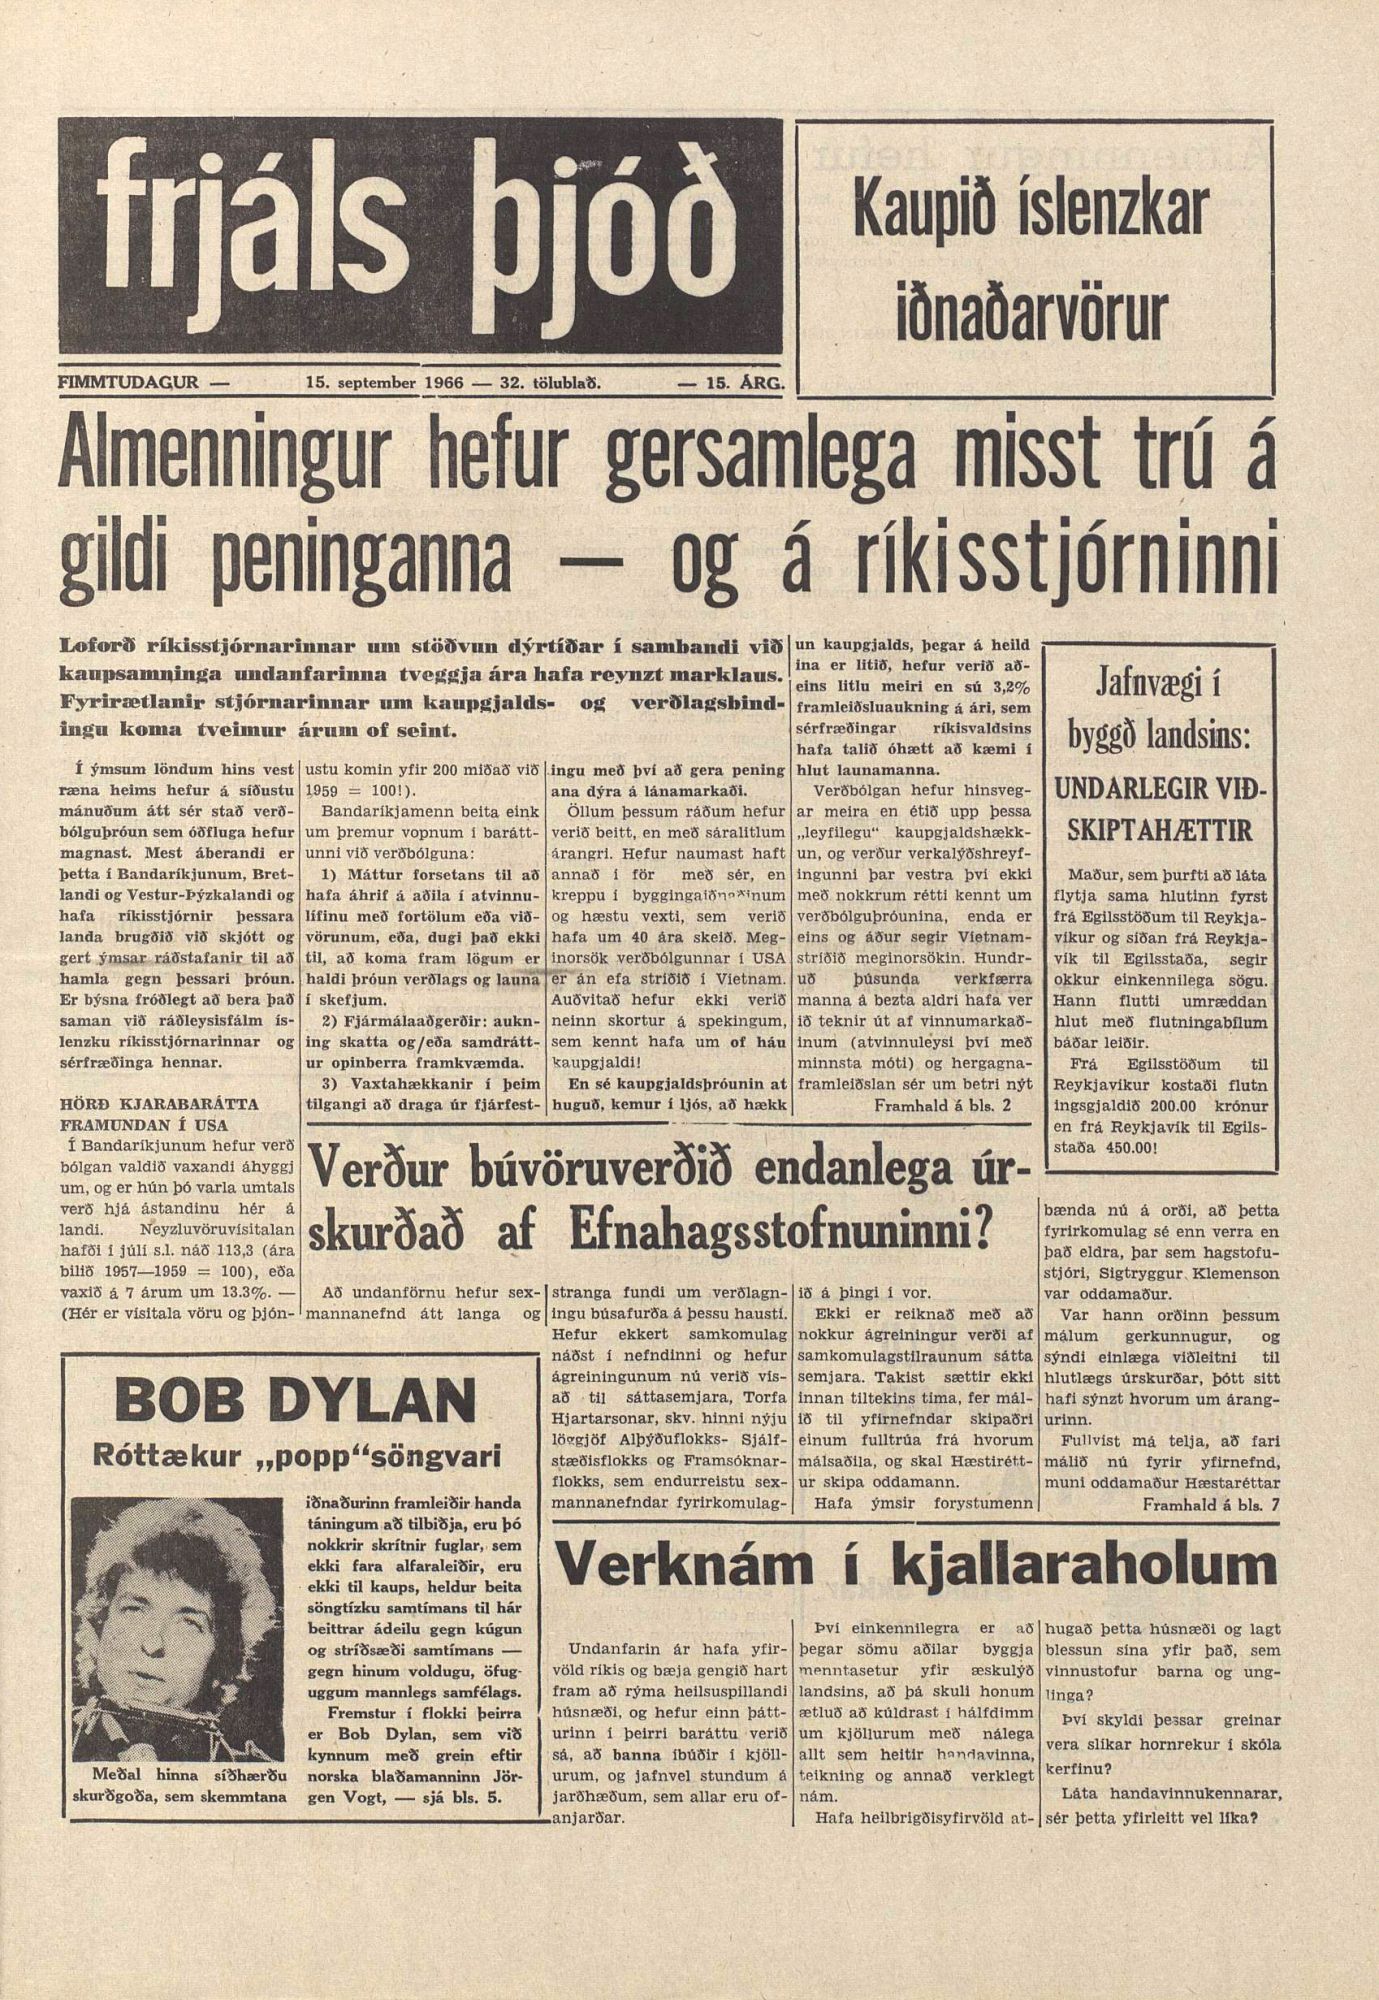 frjals bjod iceland magazine Bob Dylan cover story